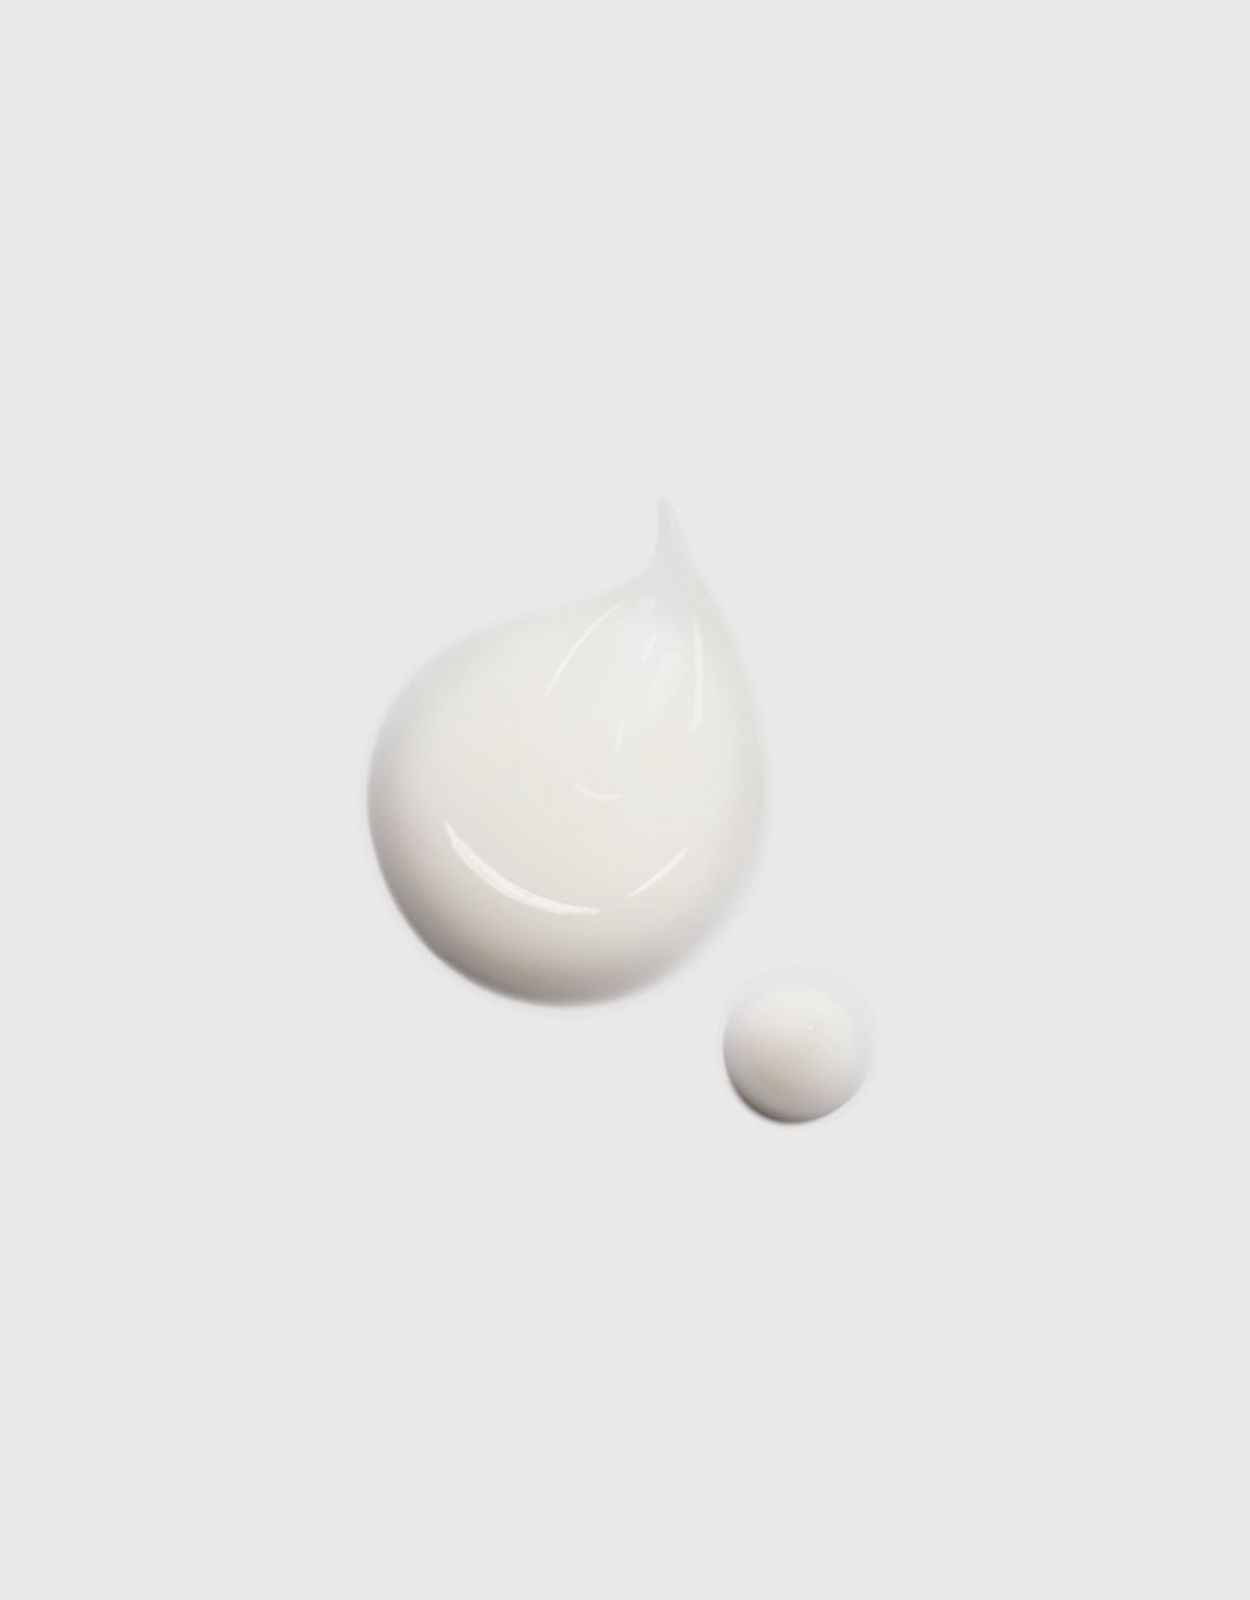 Le Lait Anti-Pollution Make-Up Remover Cleansing Milk